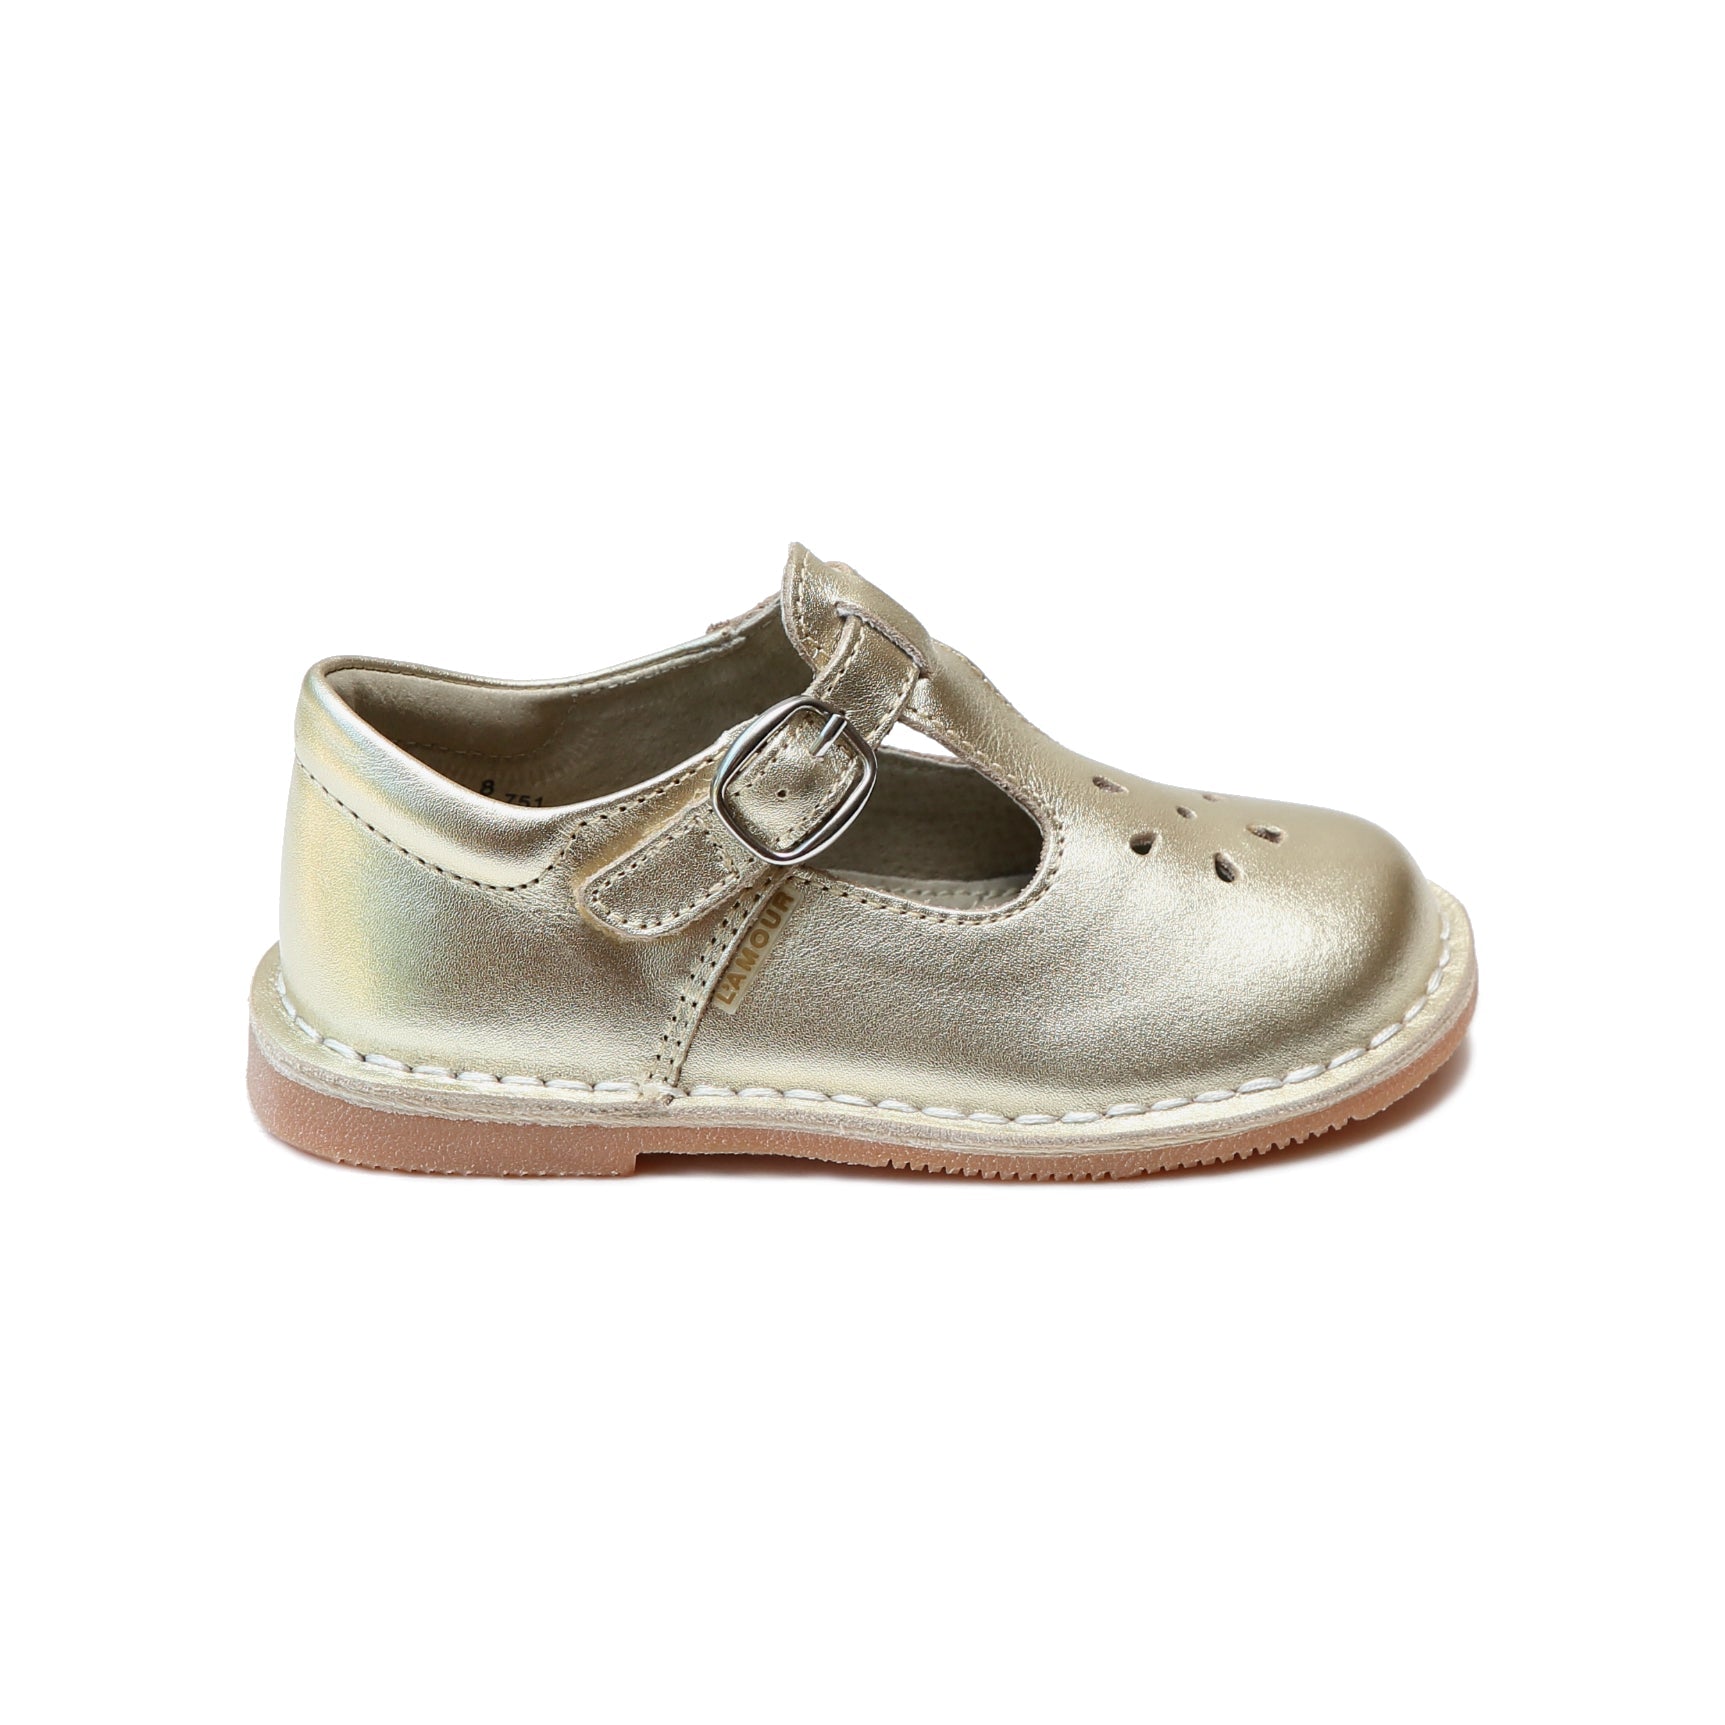 L'Amour Joy Metallic Leather T-Strap Mary Jane Mary Janes